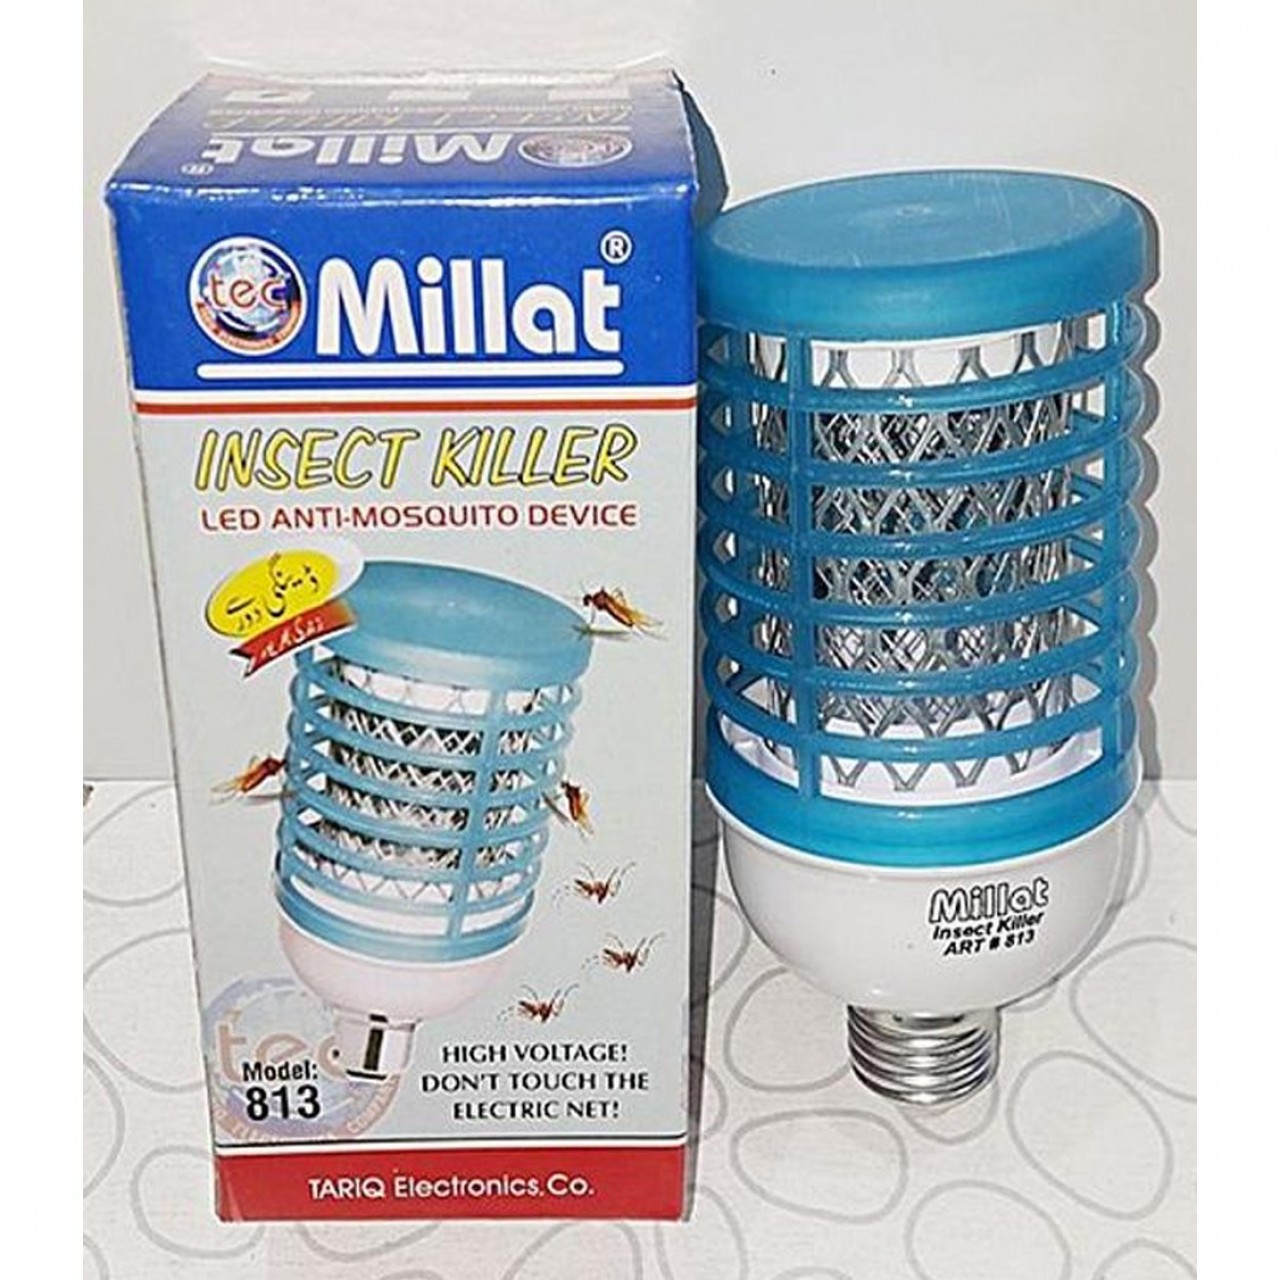 Millat Insect Killer ART-813 - LED Anti-Mosquito Device